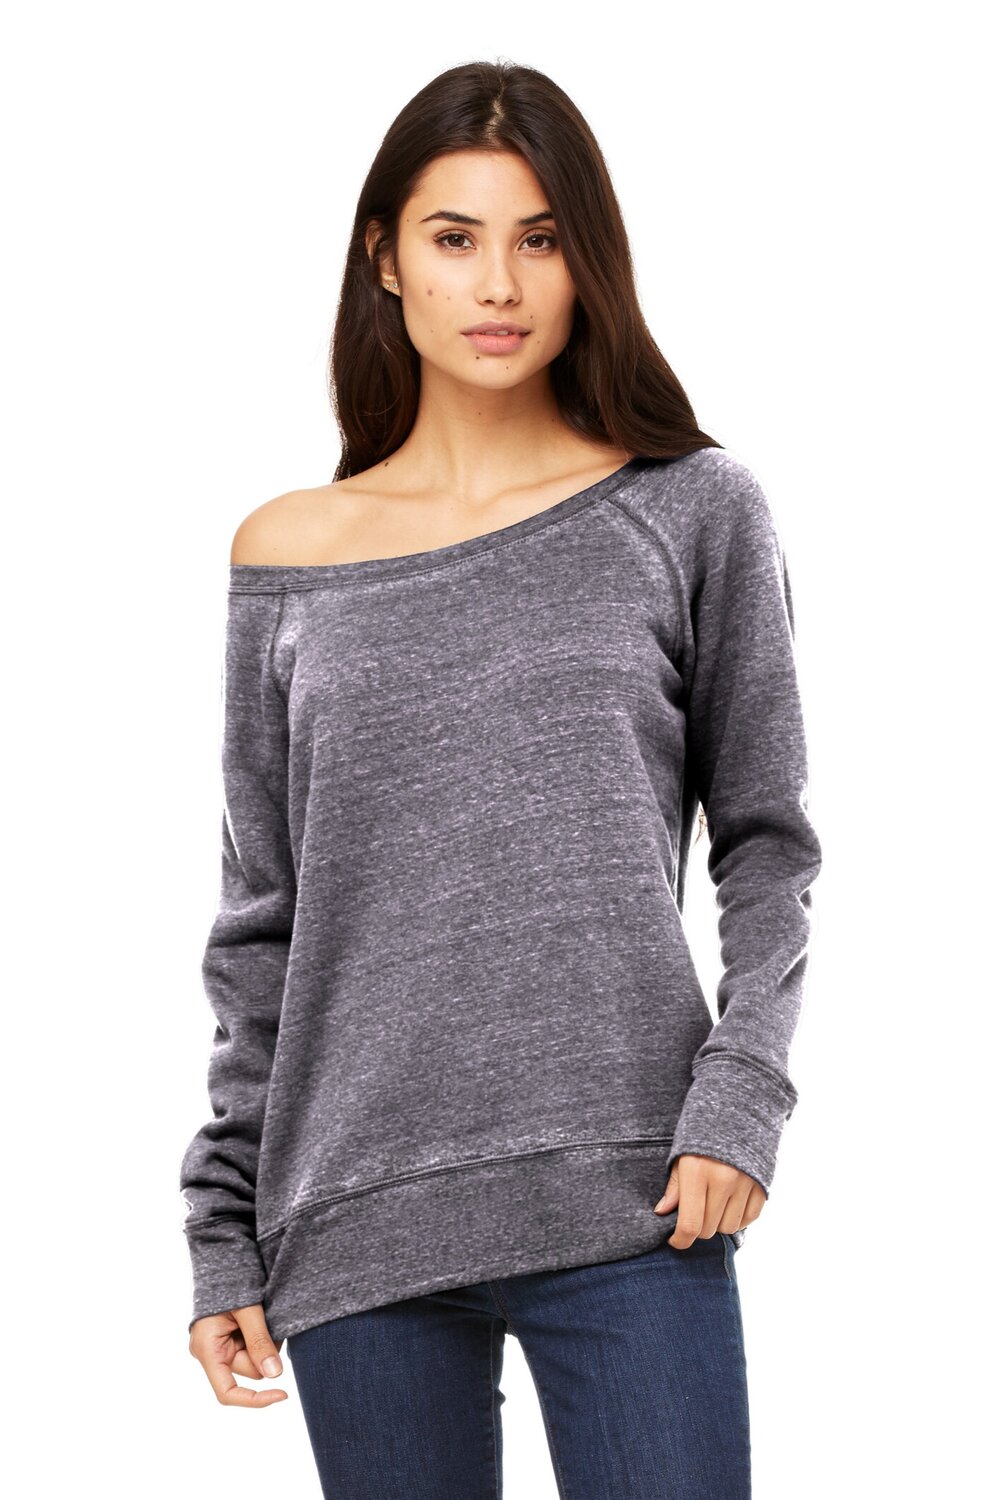 Bella Canvas Premium Sweatshirt - With Embroidery or Without – OhSewDarling